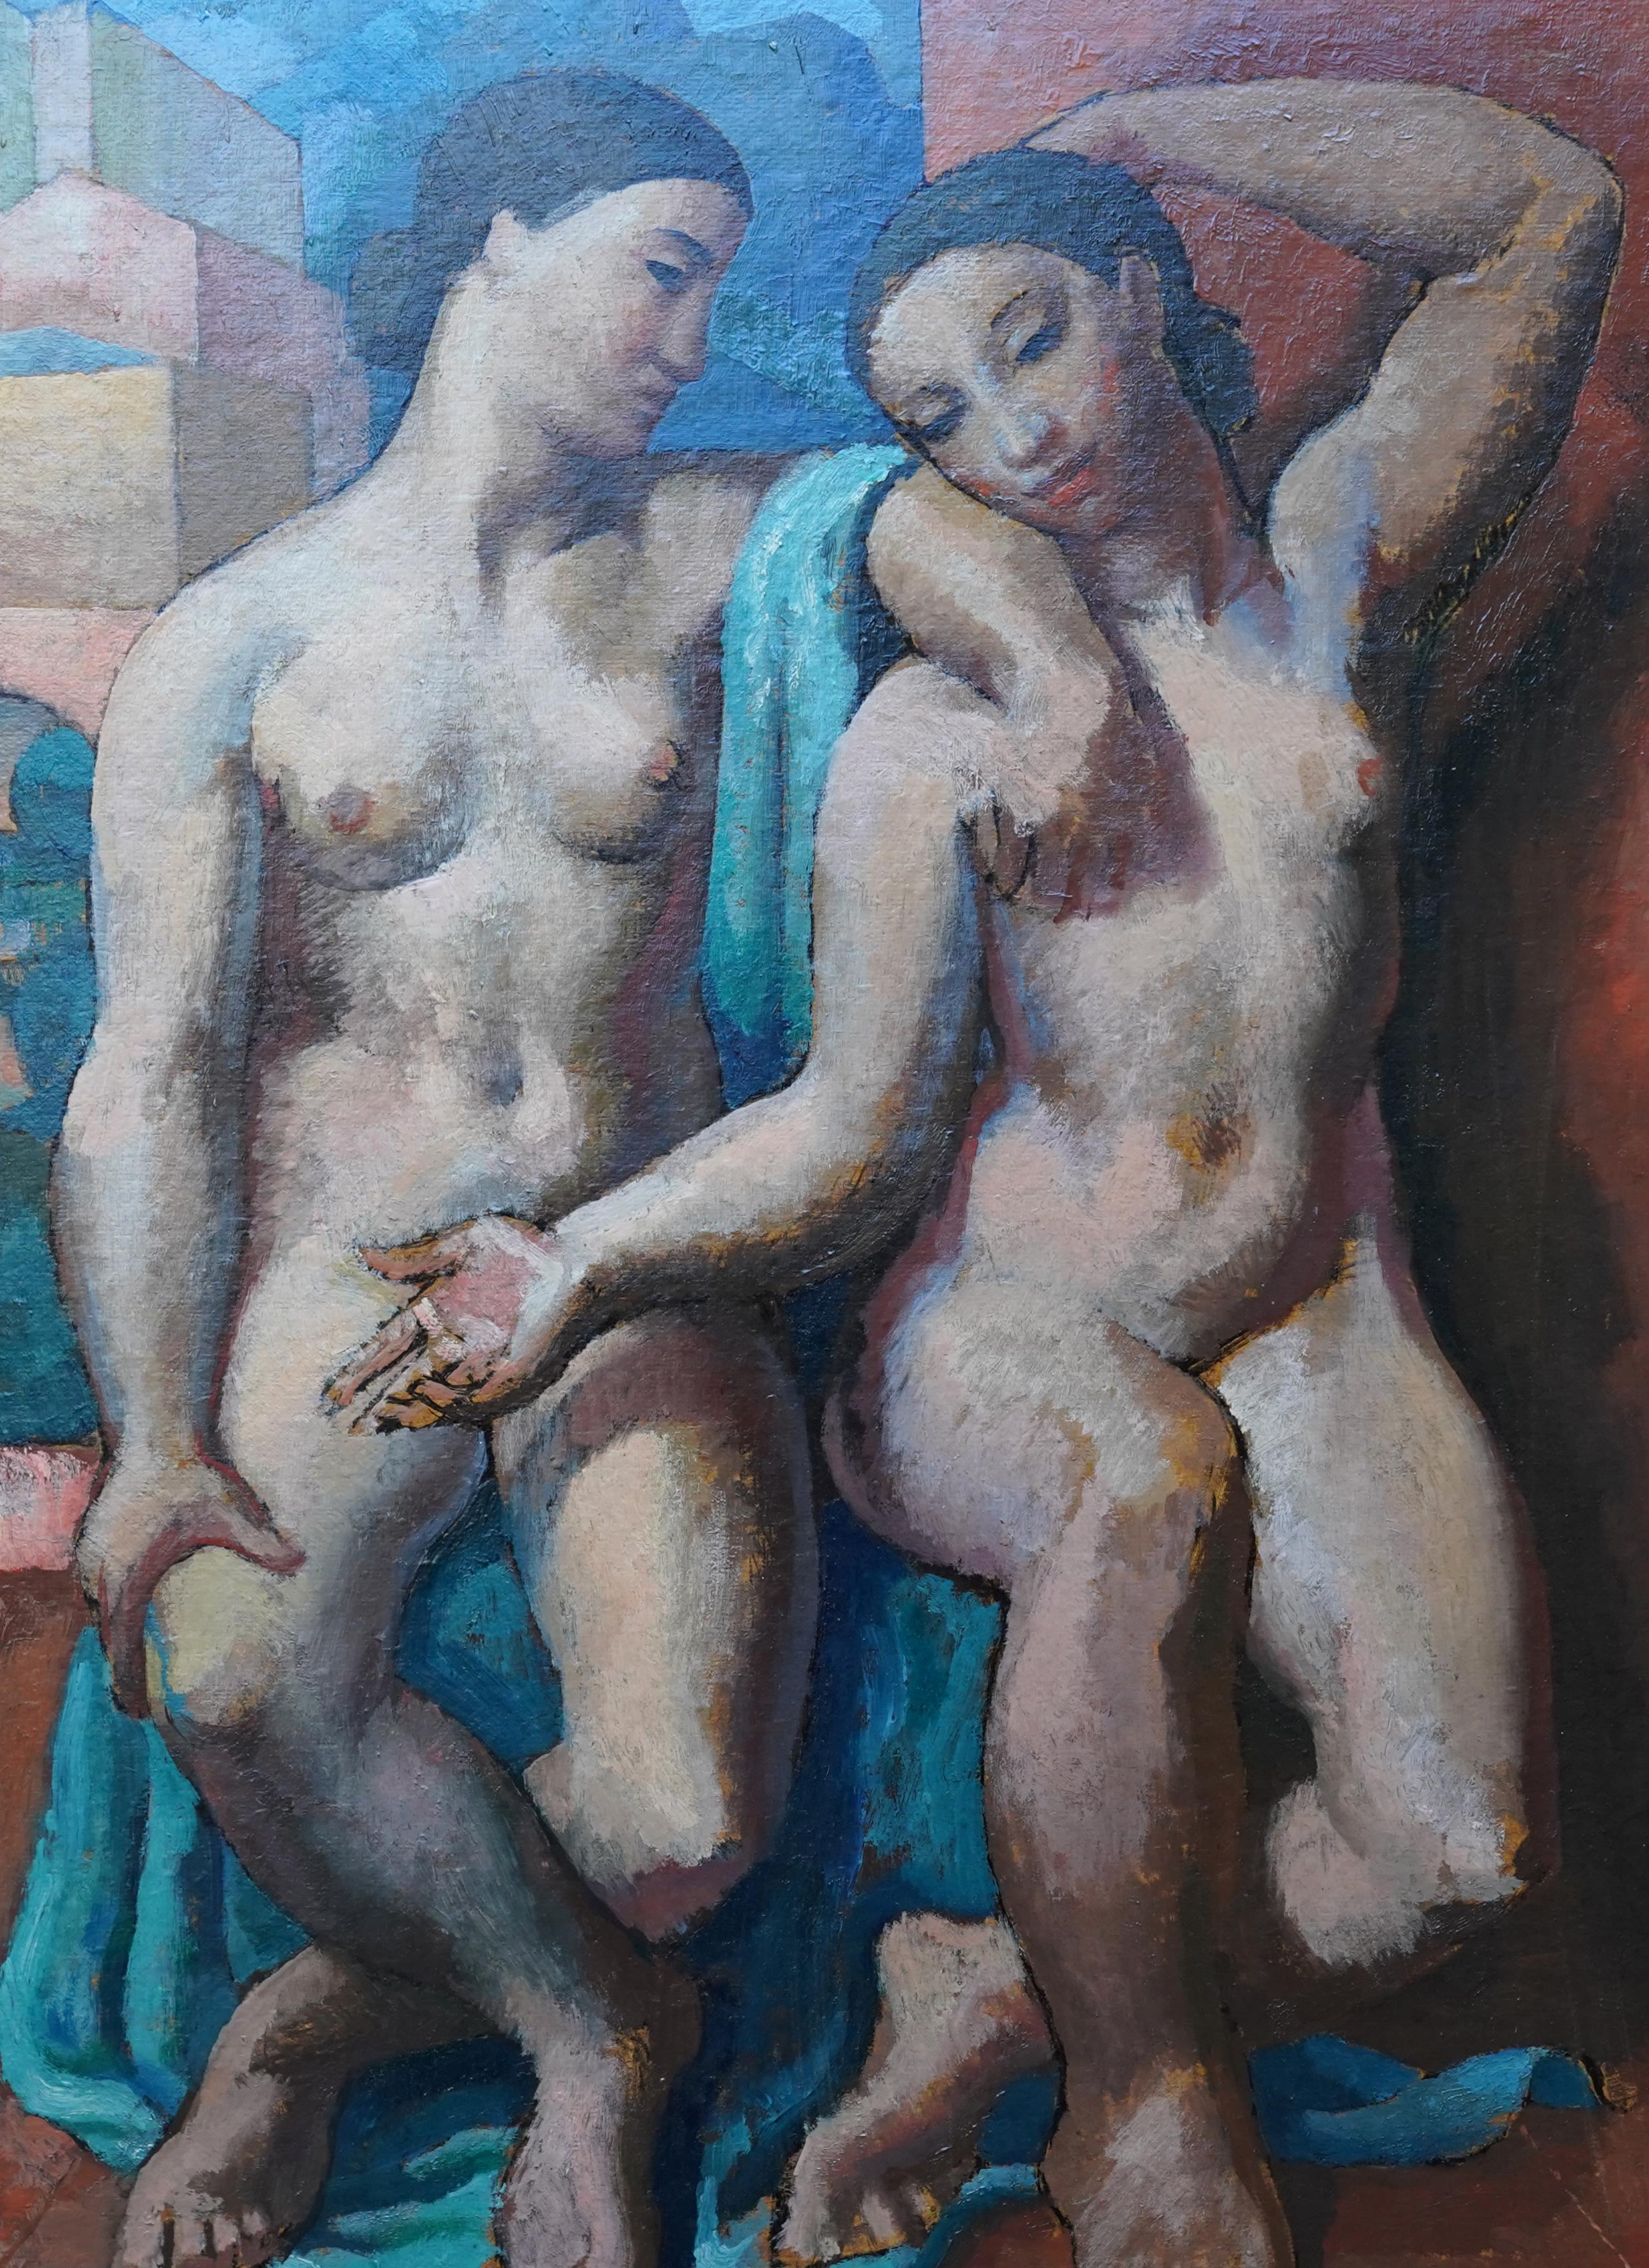 This lovely British Modernist portrait oil painting is by noted artist Lionel Ellis. The painting comes from a collection of works by the artist, previously owned by his wife. Painted circa 1930, the composition is two seated nude women in a